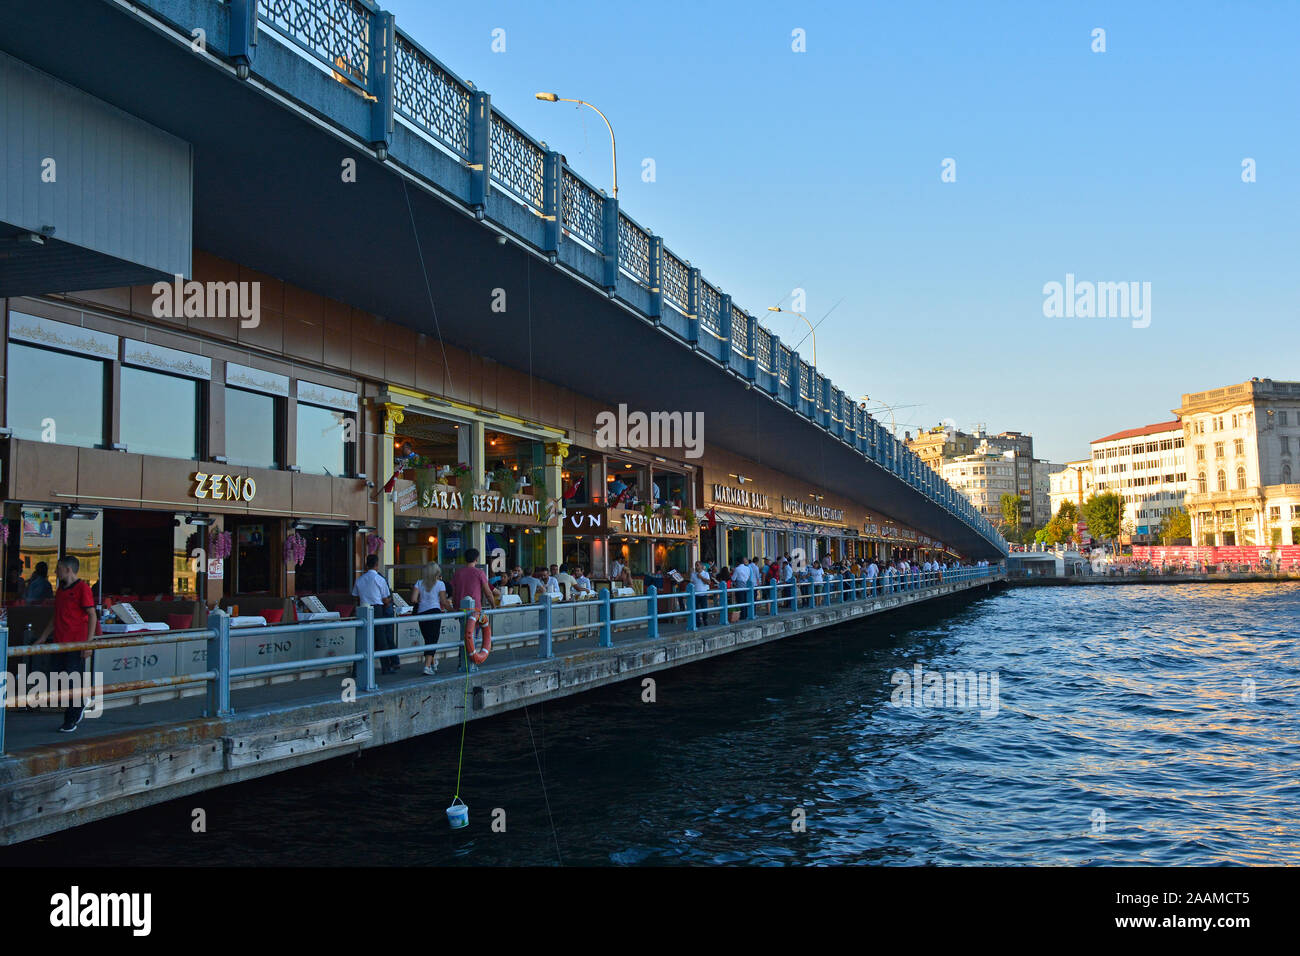 Istanbul, Turkey - September 6th 2019. Locals and tourists walk past resturants on the lower walkway of the Galata Bridge spanning the Golden Horn Stock Photo